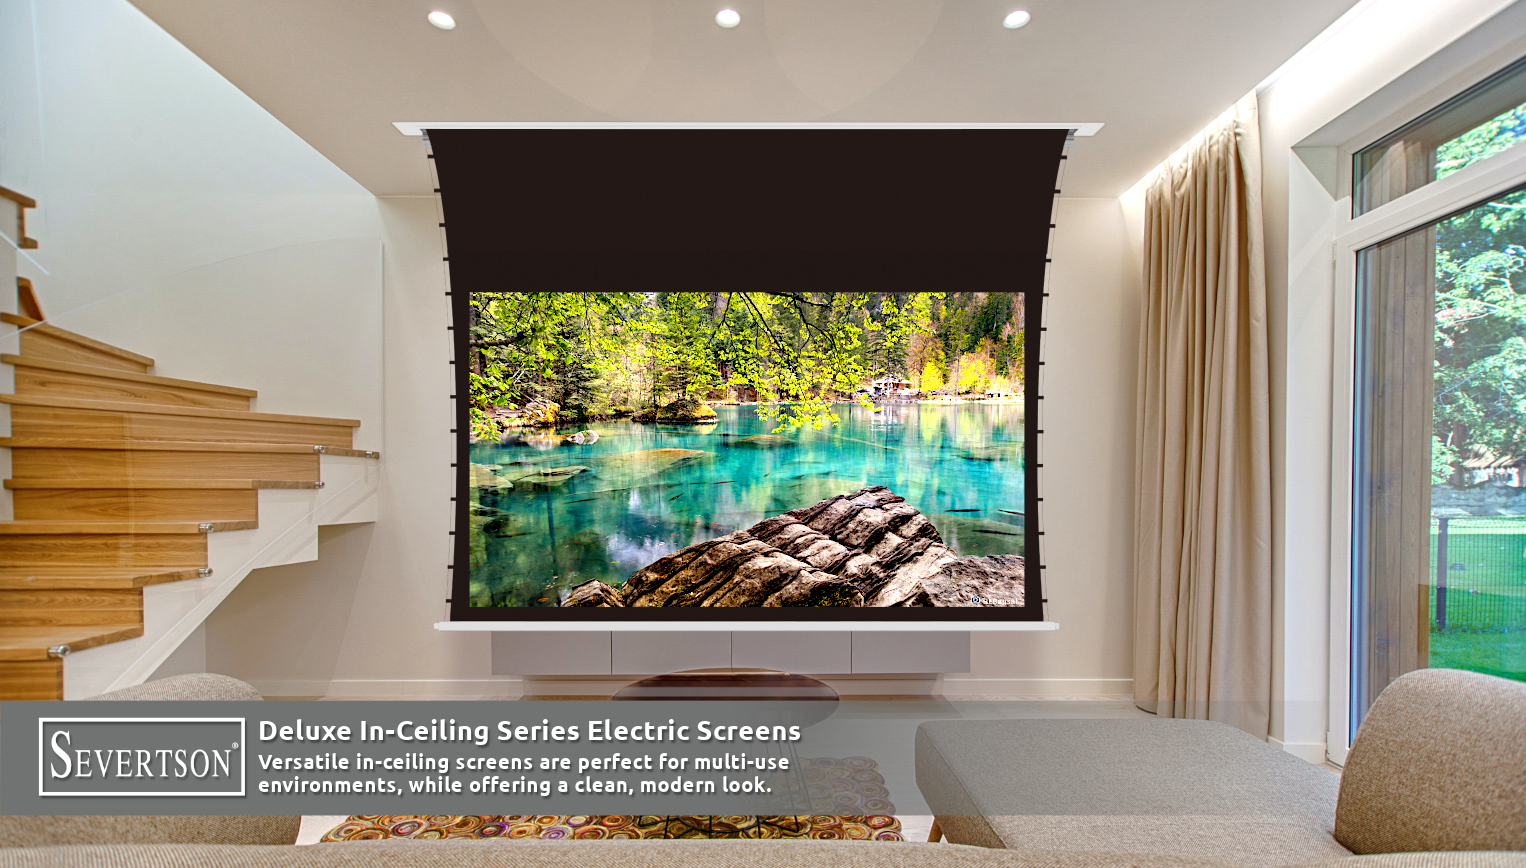 Severtson to Show New Deluxe In-Ceiling Motorized Projection Screens at InfoComm 2022